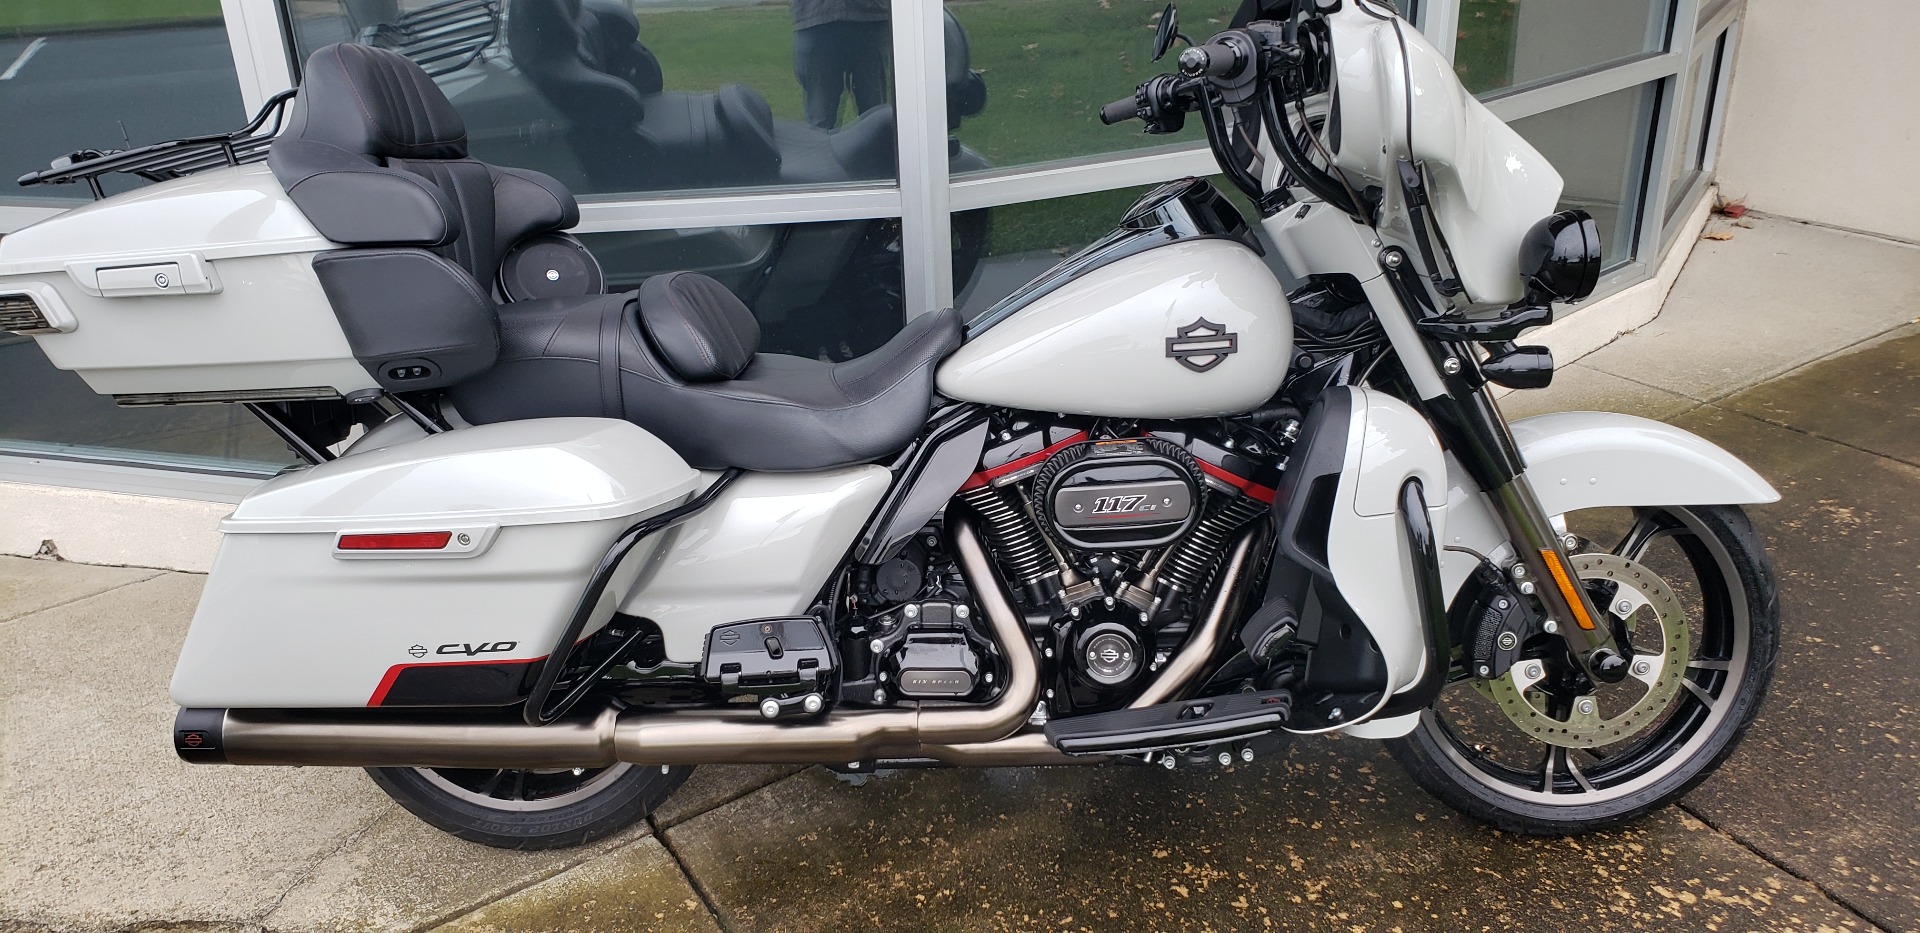 2020 Harley-Davidson CVO ELECTRA GLIDE ULTRA LIMITED in Dumfries, Virginia - Photo 2